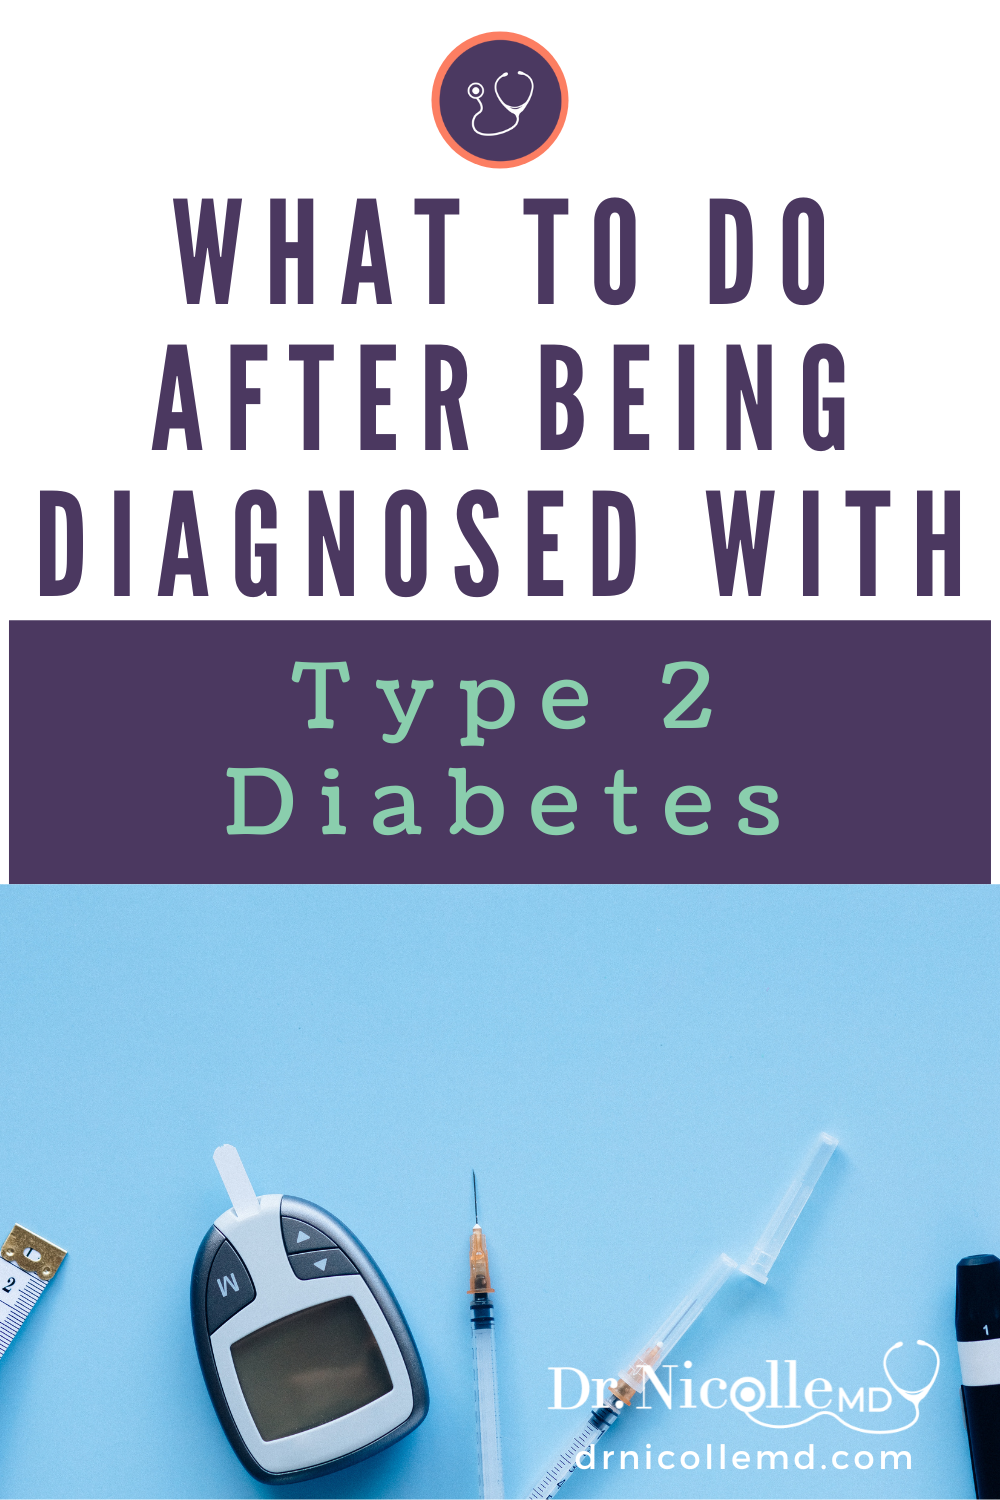 What to do After Being Diagnosed With Type 2 Diabetes